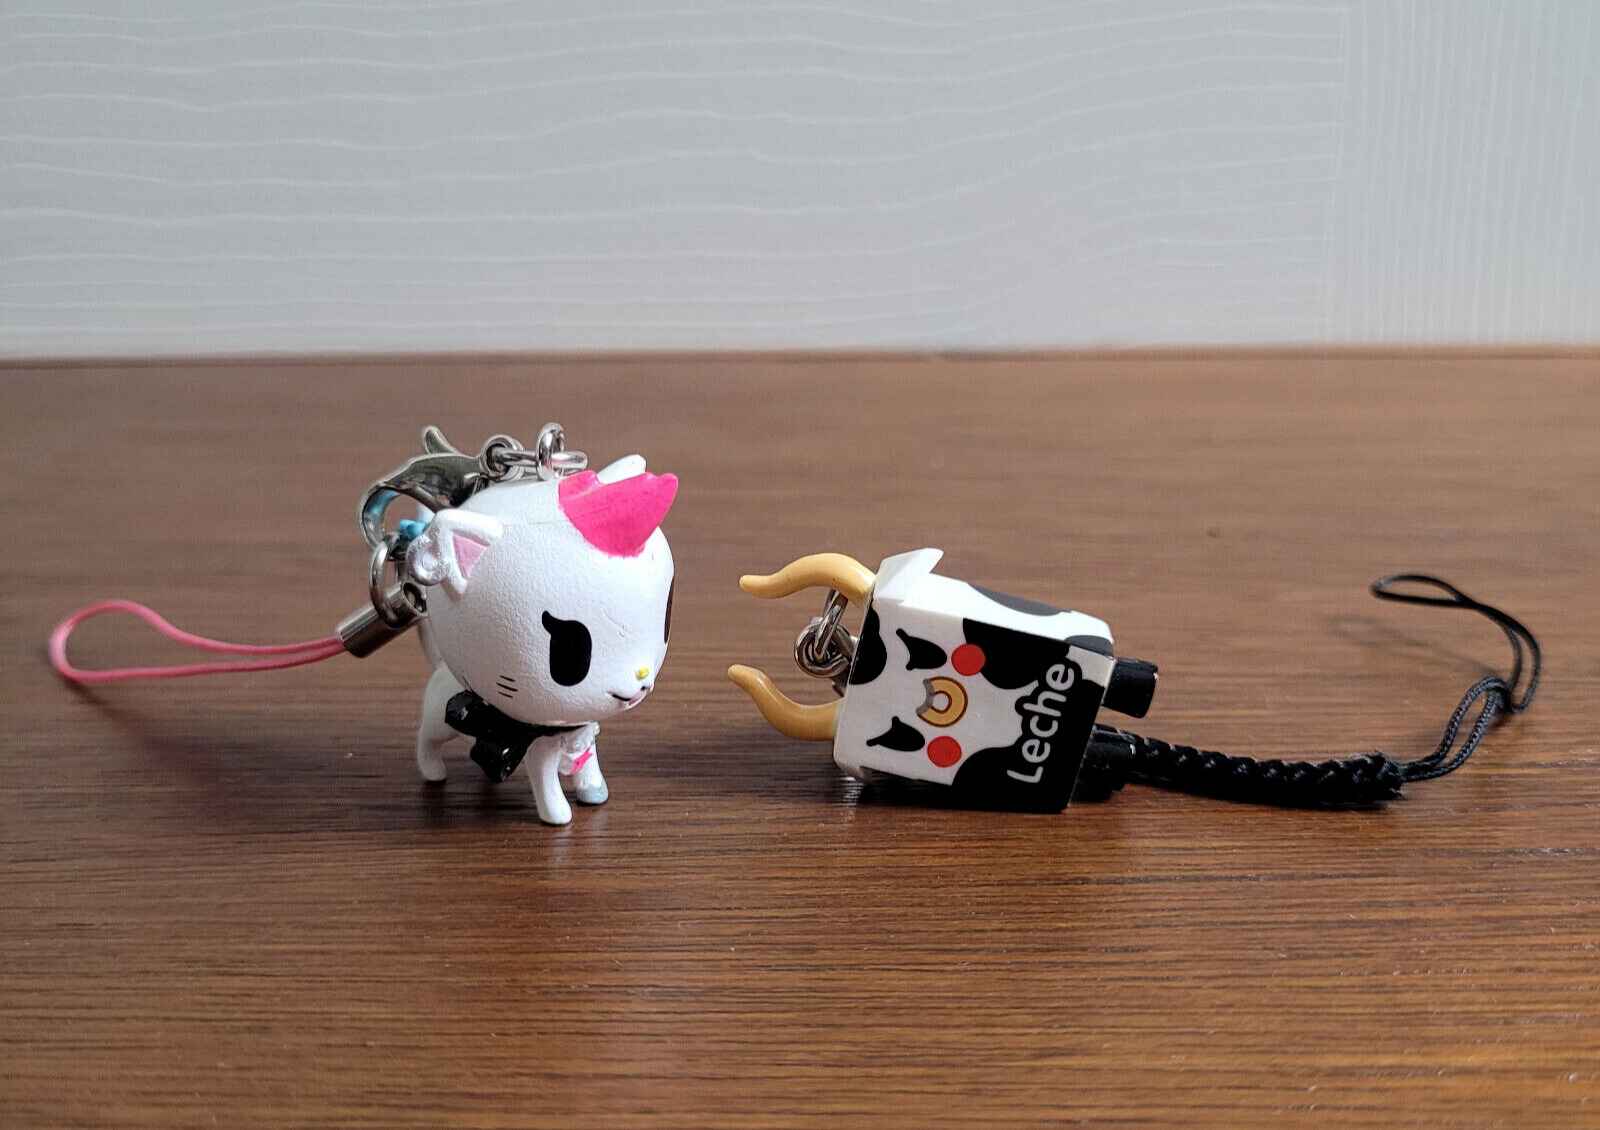 cleaning-tips-for-tokidoki-phone-charms-maintenance-guide